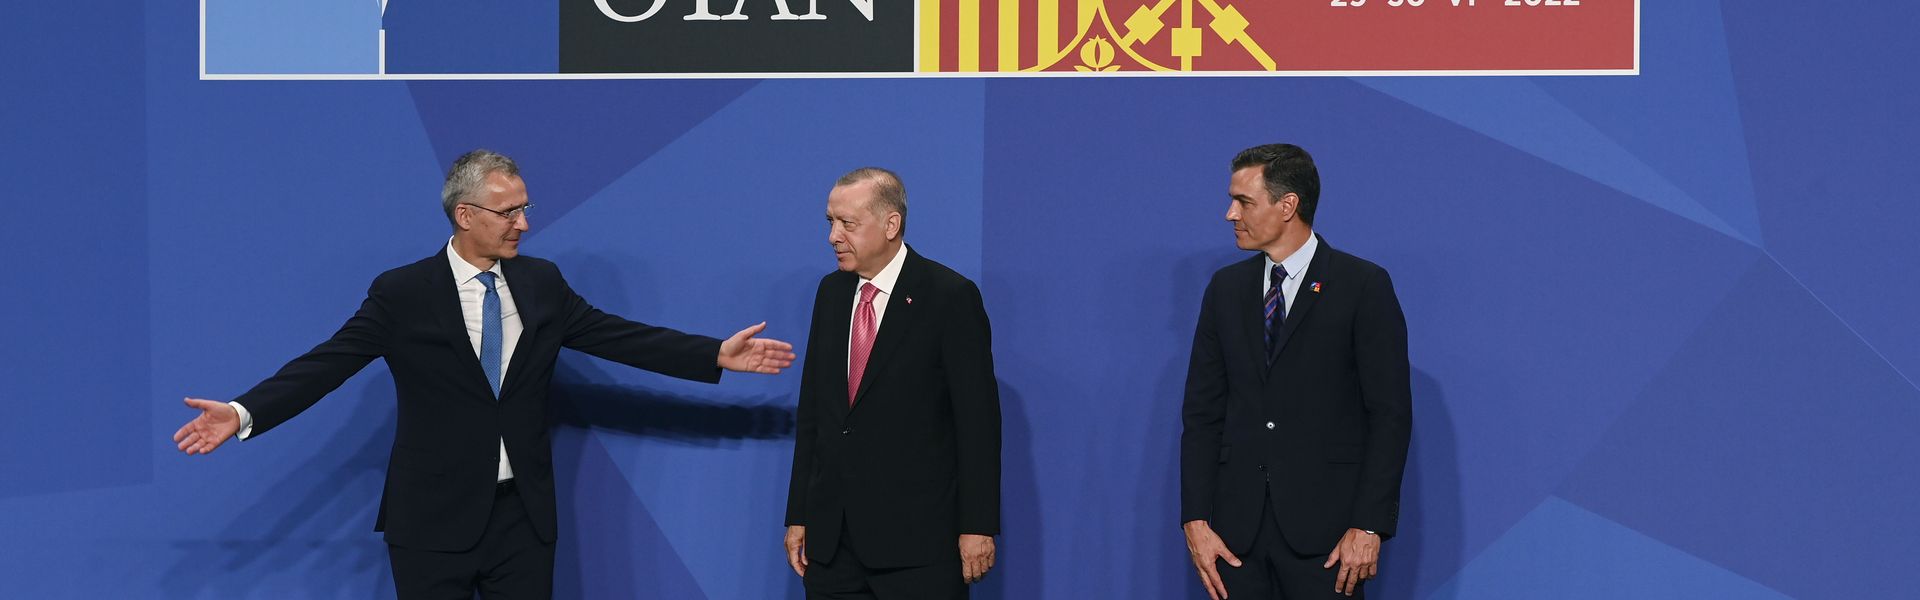 Turkish Prime Minister Recep Tayyip Erdoğan is greeted by NATO Secretary General Jens Stoltenberg and Prime Minister Pedro Sanchez of Spain, during the NATO summit in Madrid.